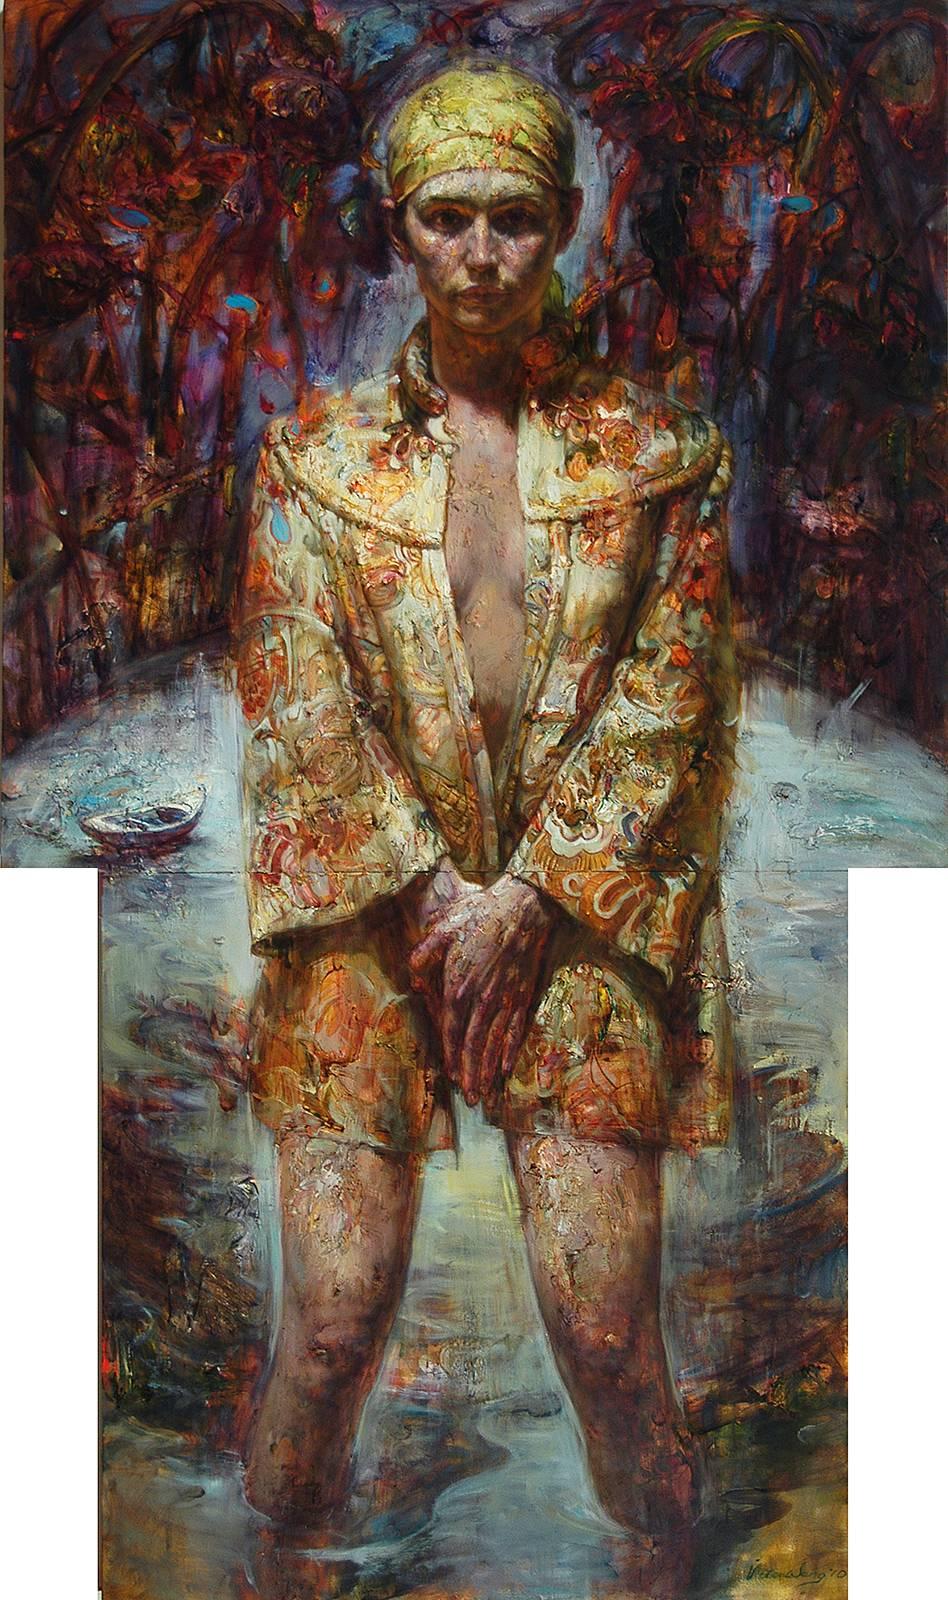 Victor Wang Portrait Painting - The Boat - Kimono Shaped Diptych Original Oil Painting With Female Figure